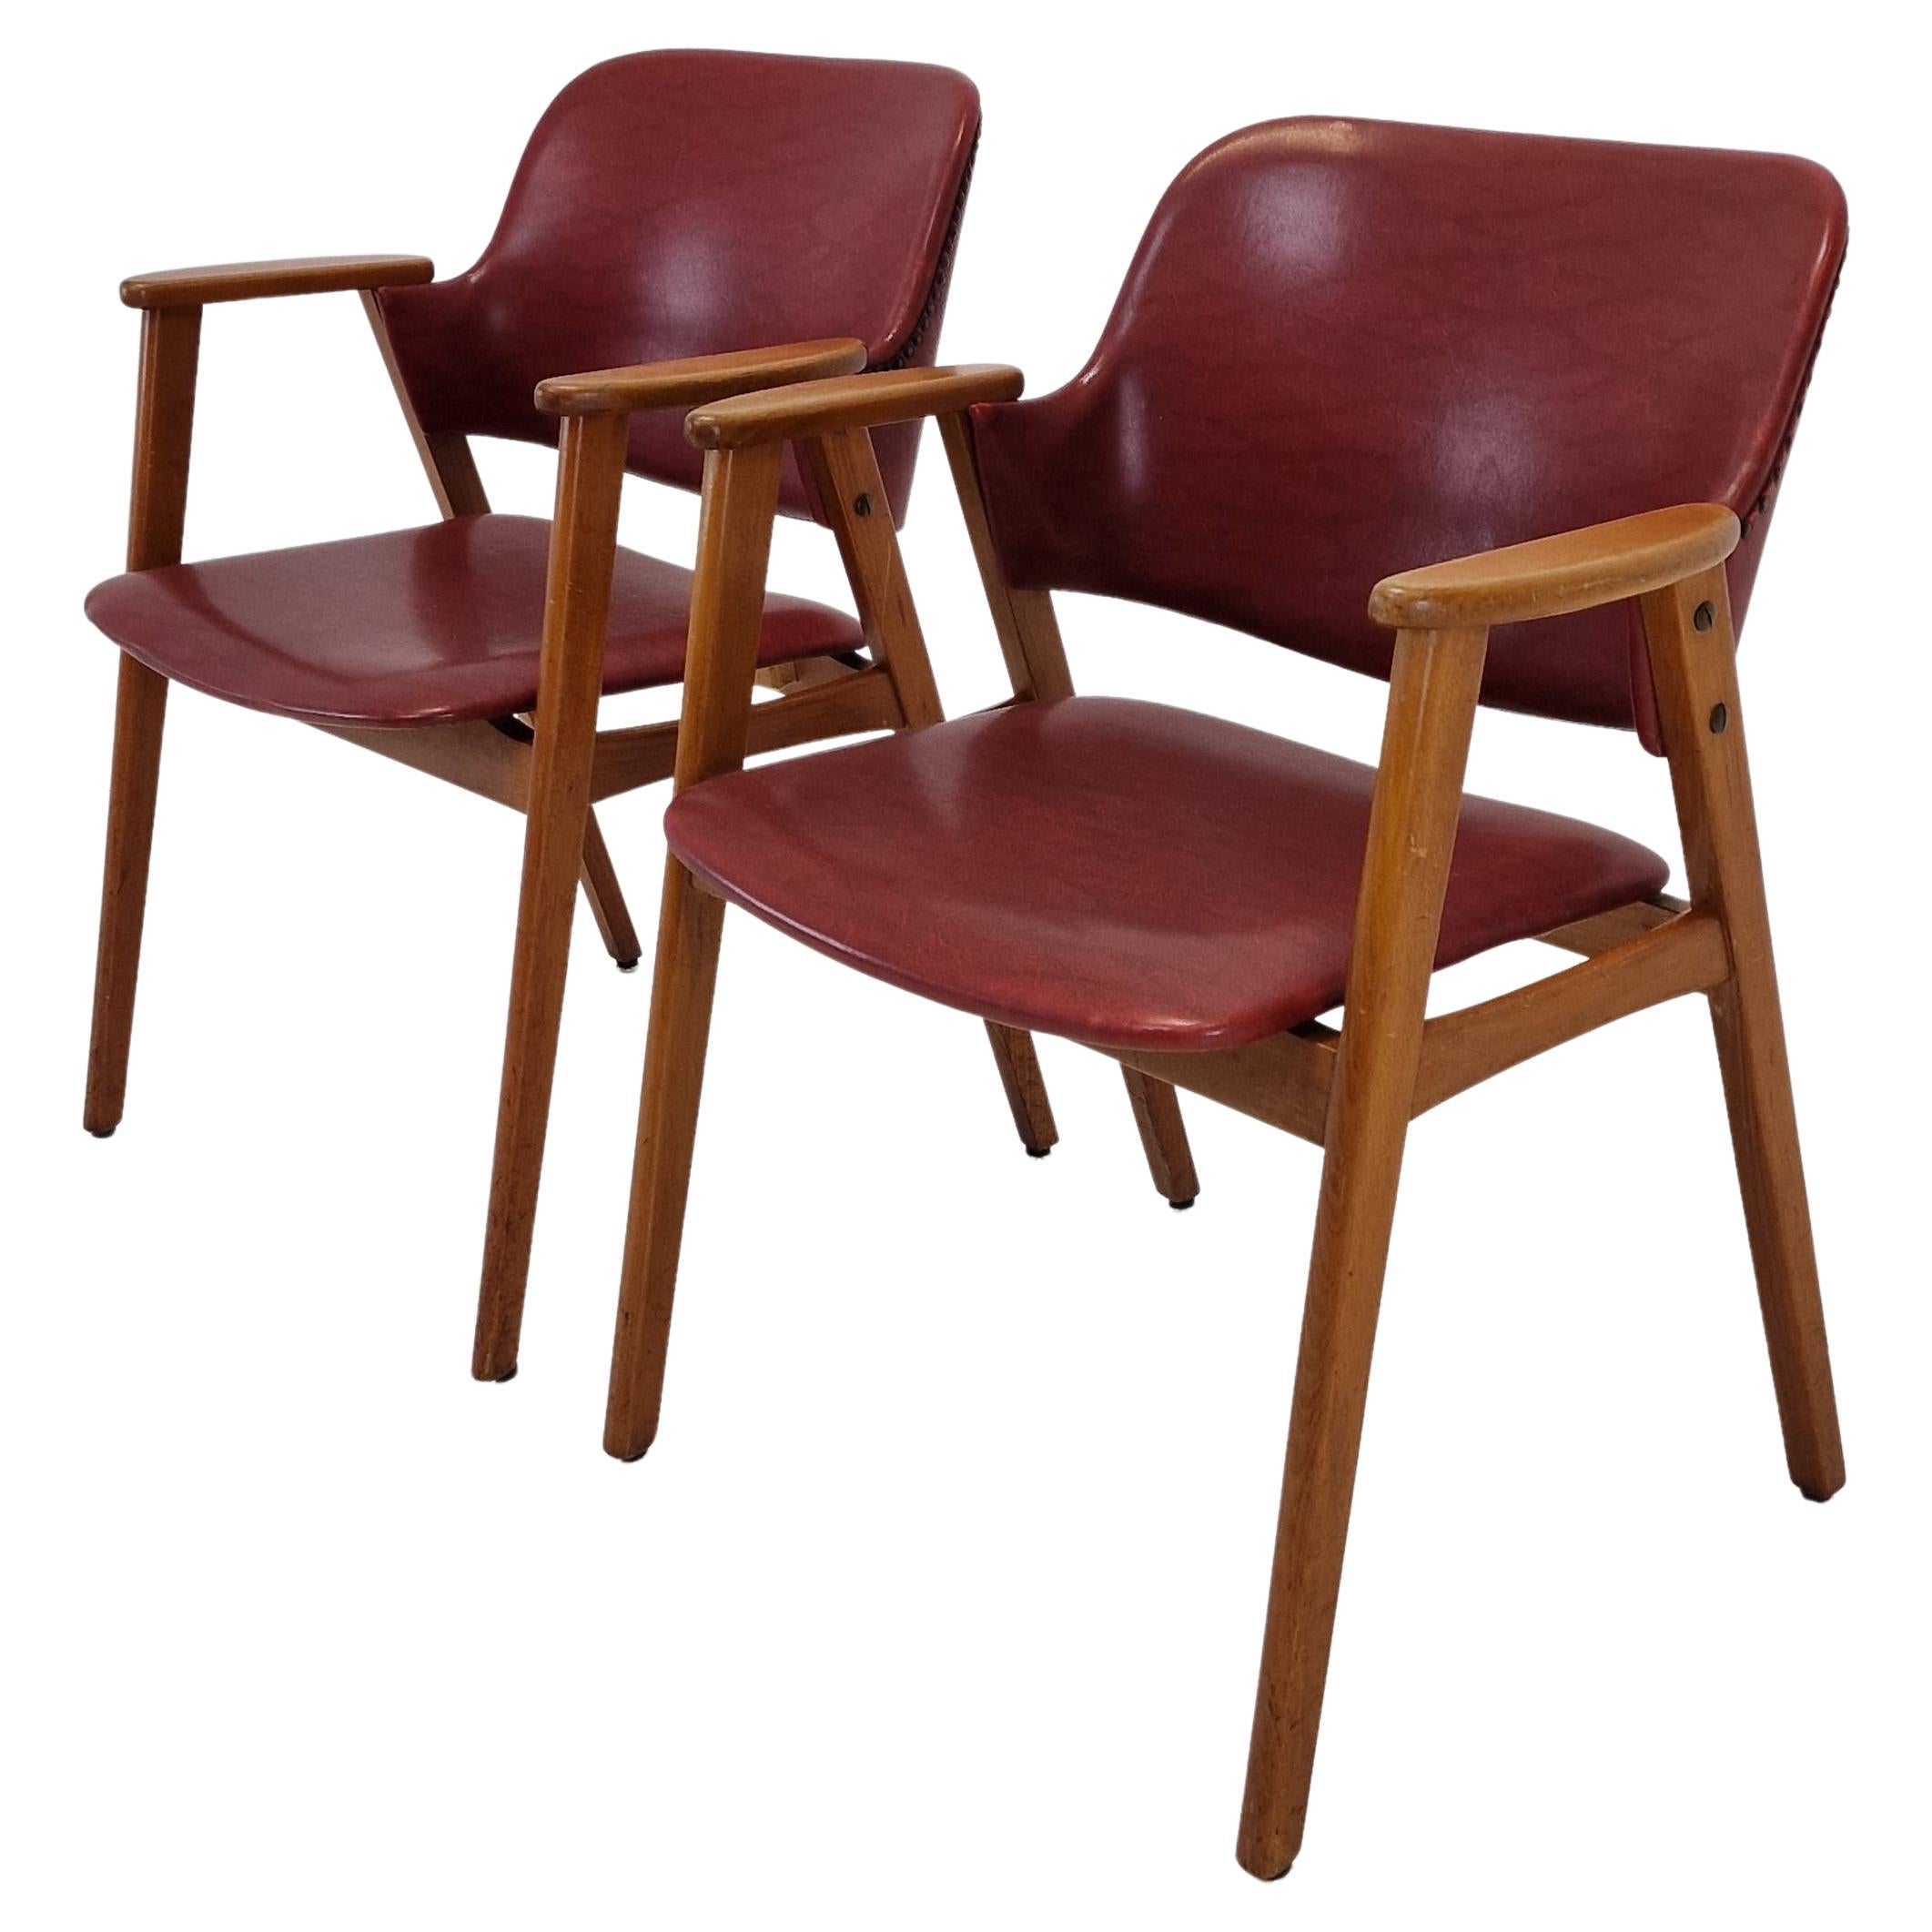 Midcentury Dining or Restaurant Chairs by Cees Braakman for Pastoe, 1950s For Sale